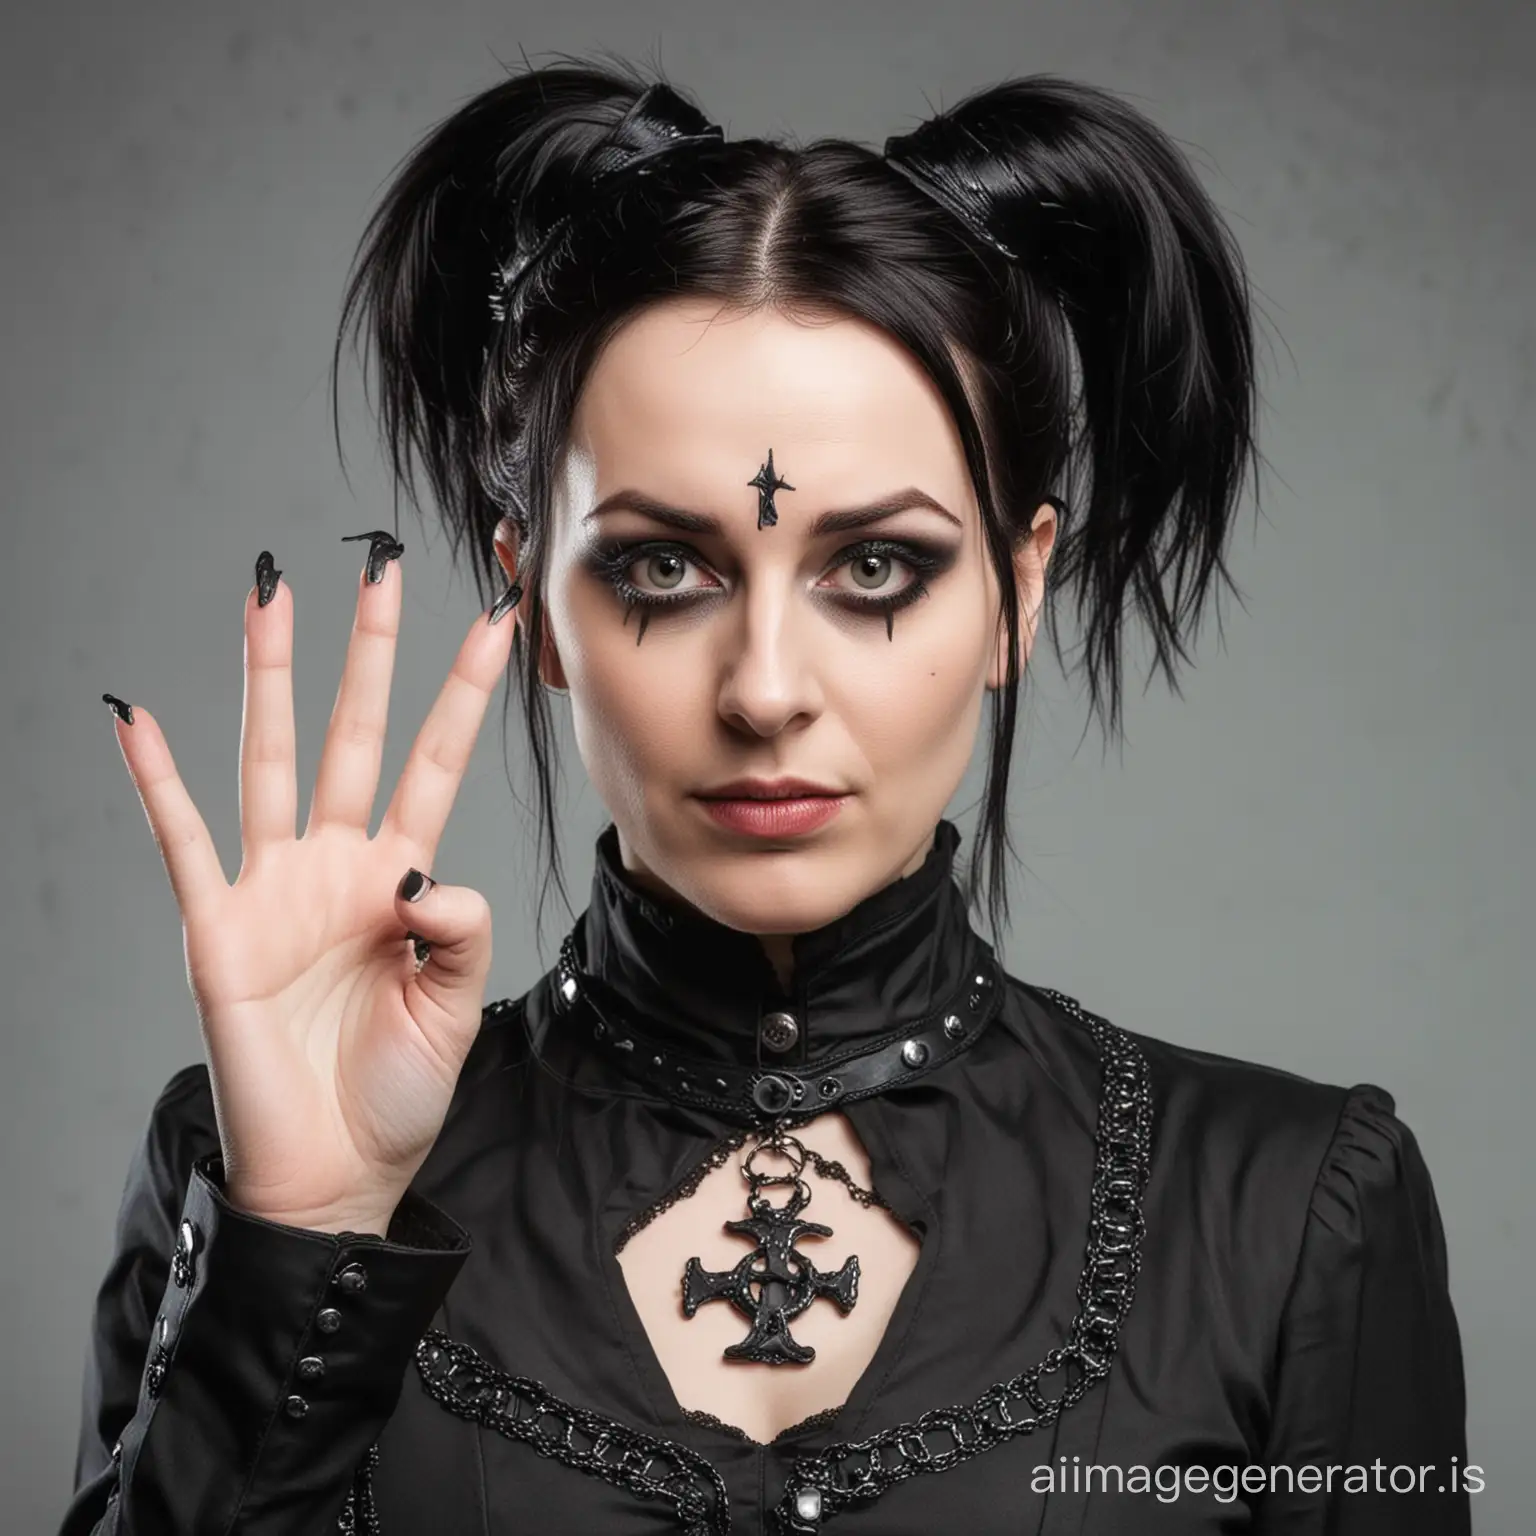 Goth-German-Woman-with-Dominant-Aura-Gesturing-Loser-Sign